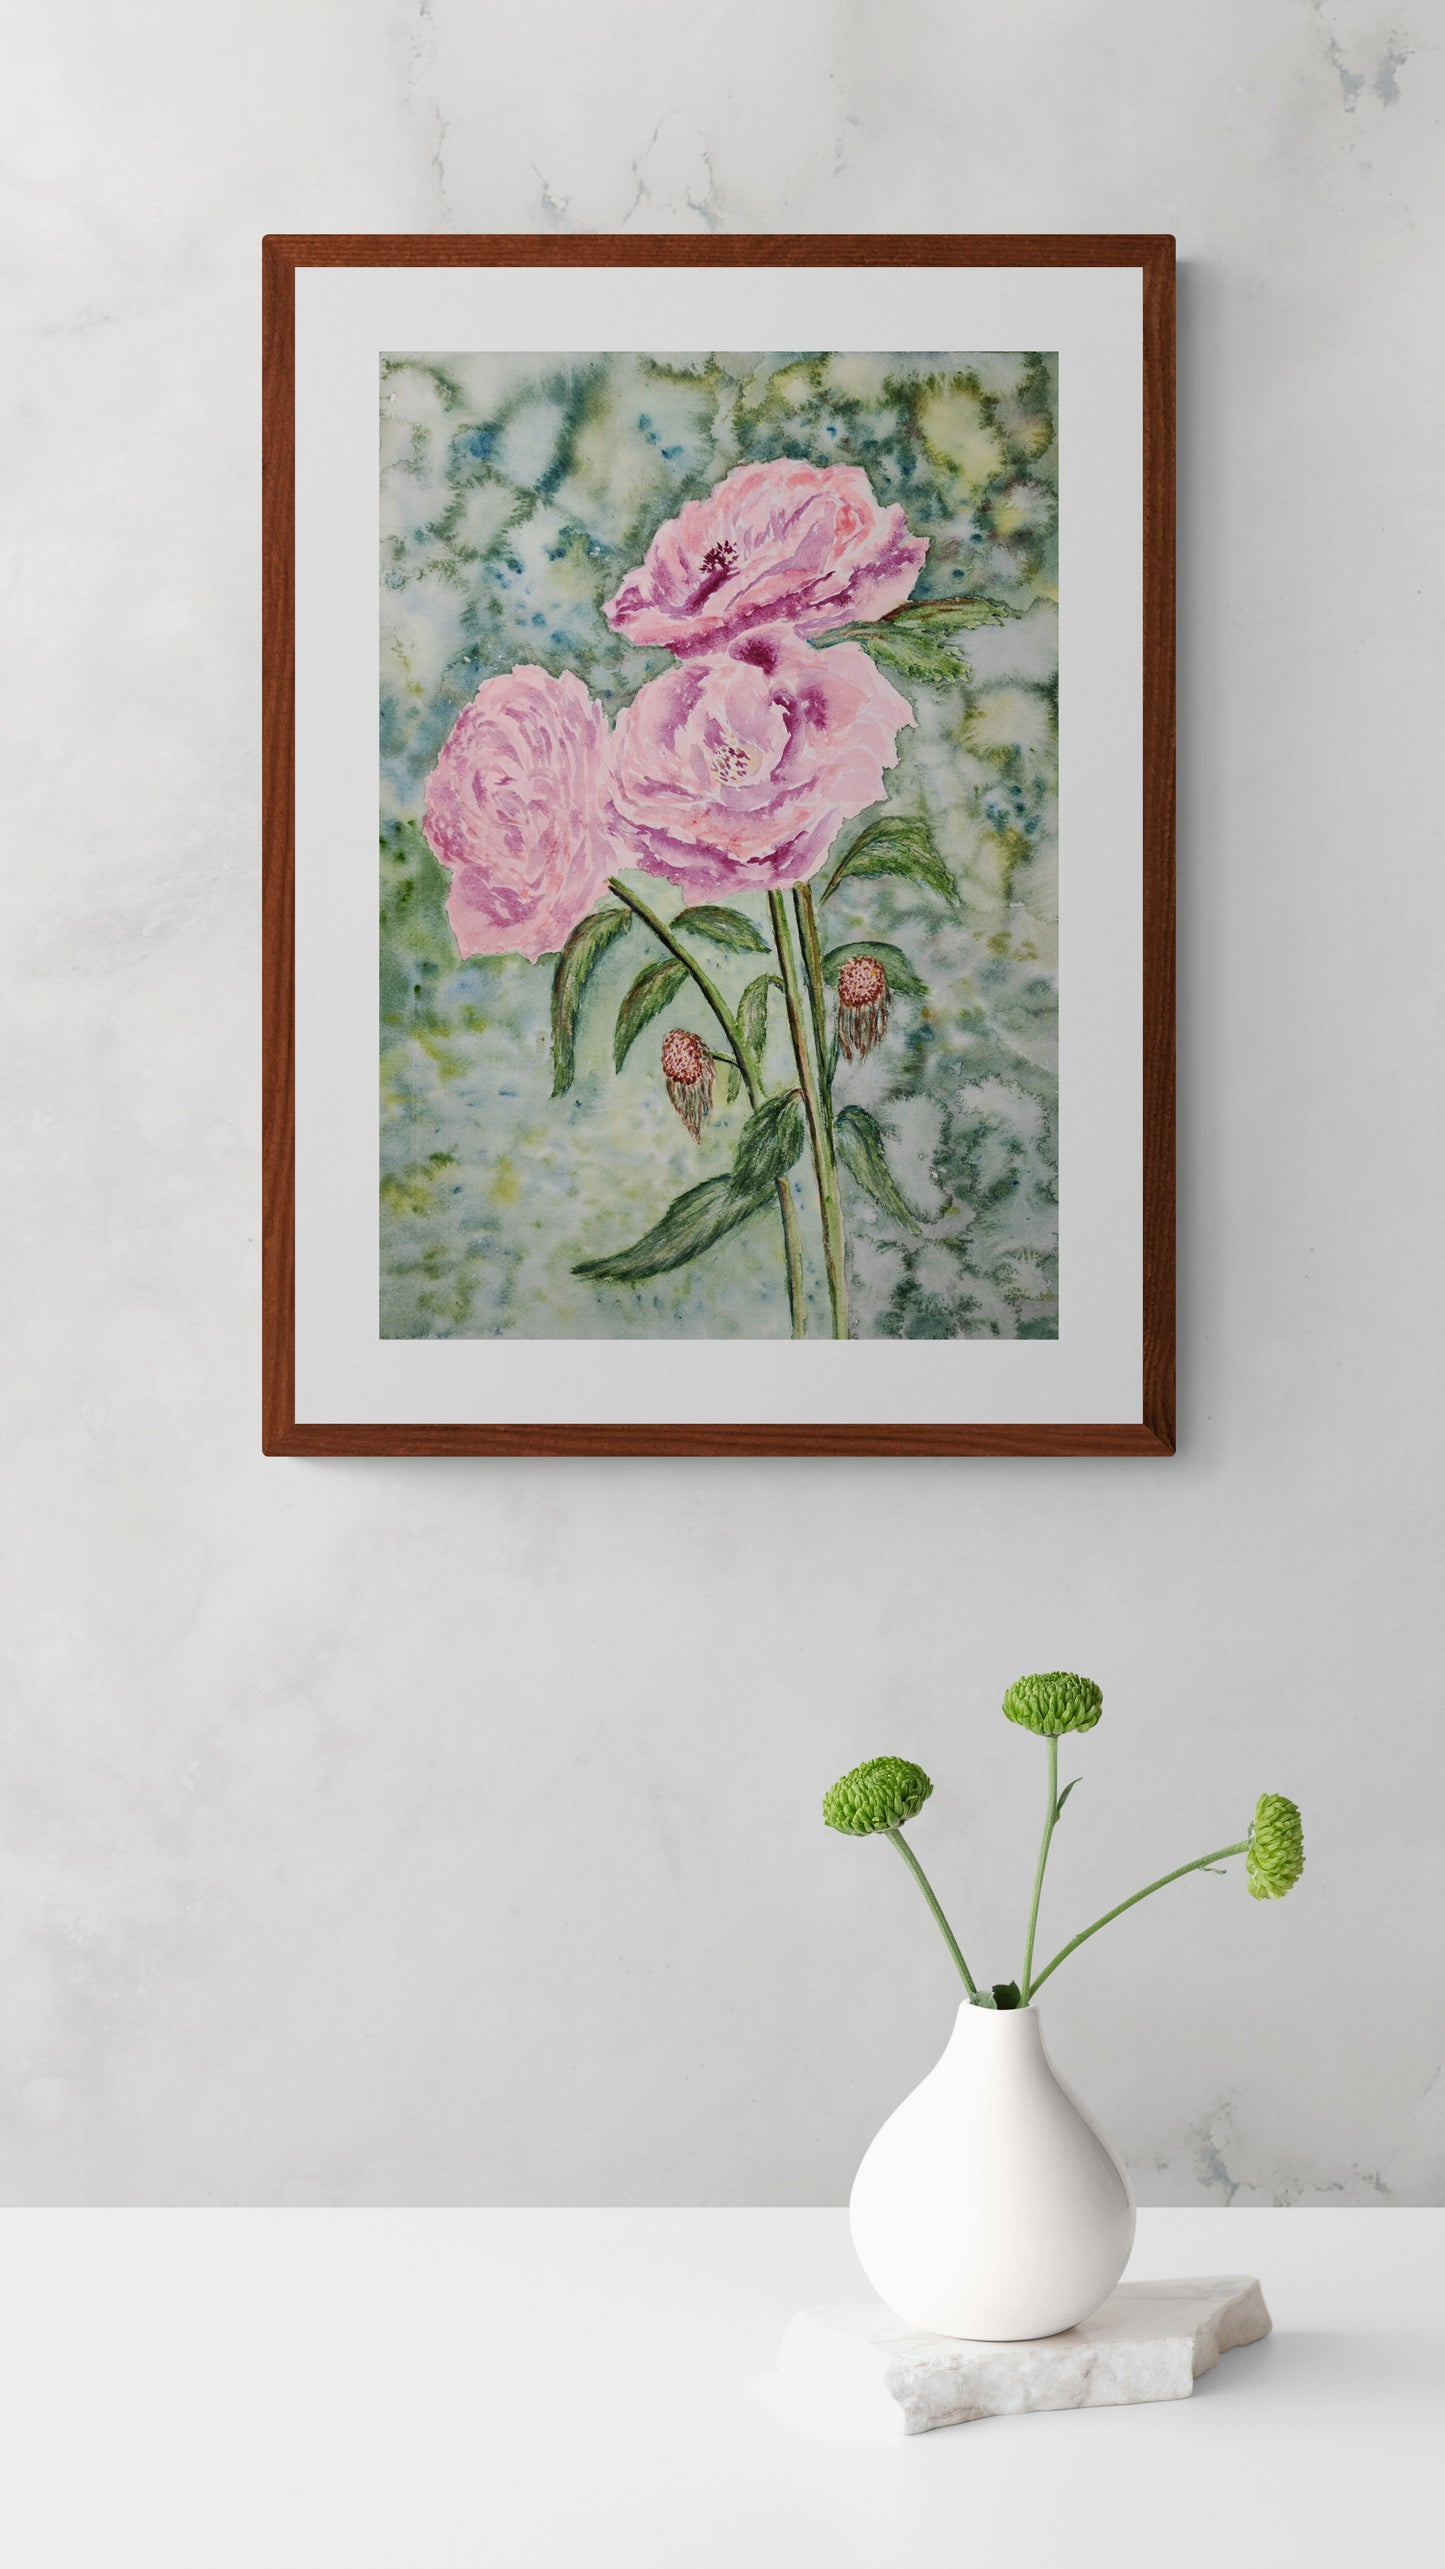 Autumn Roses watercolor painting